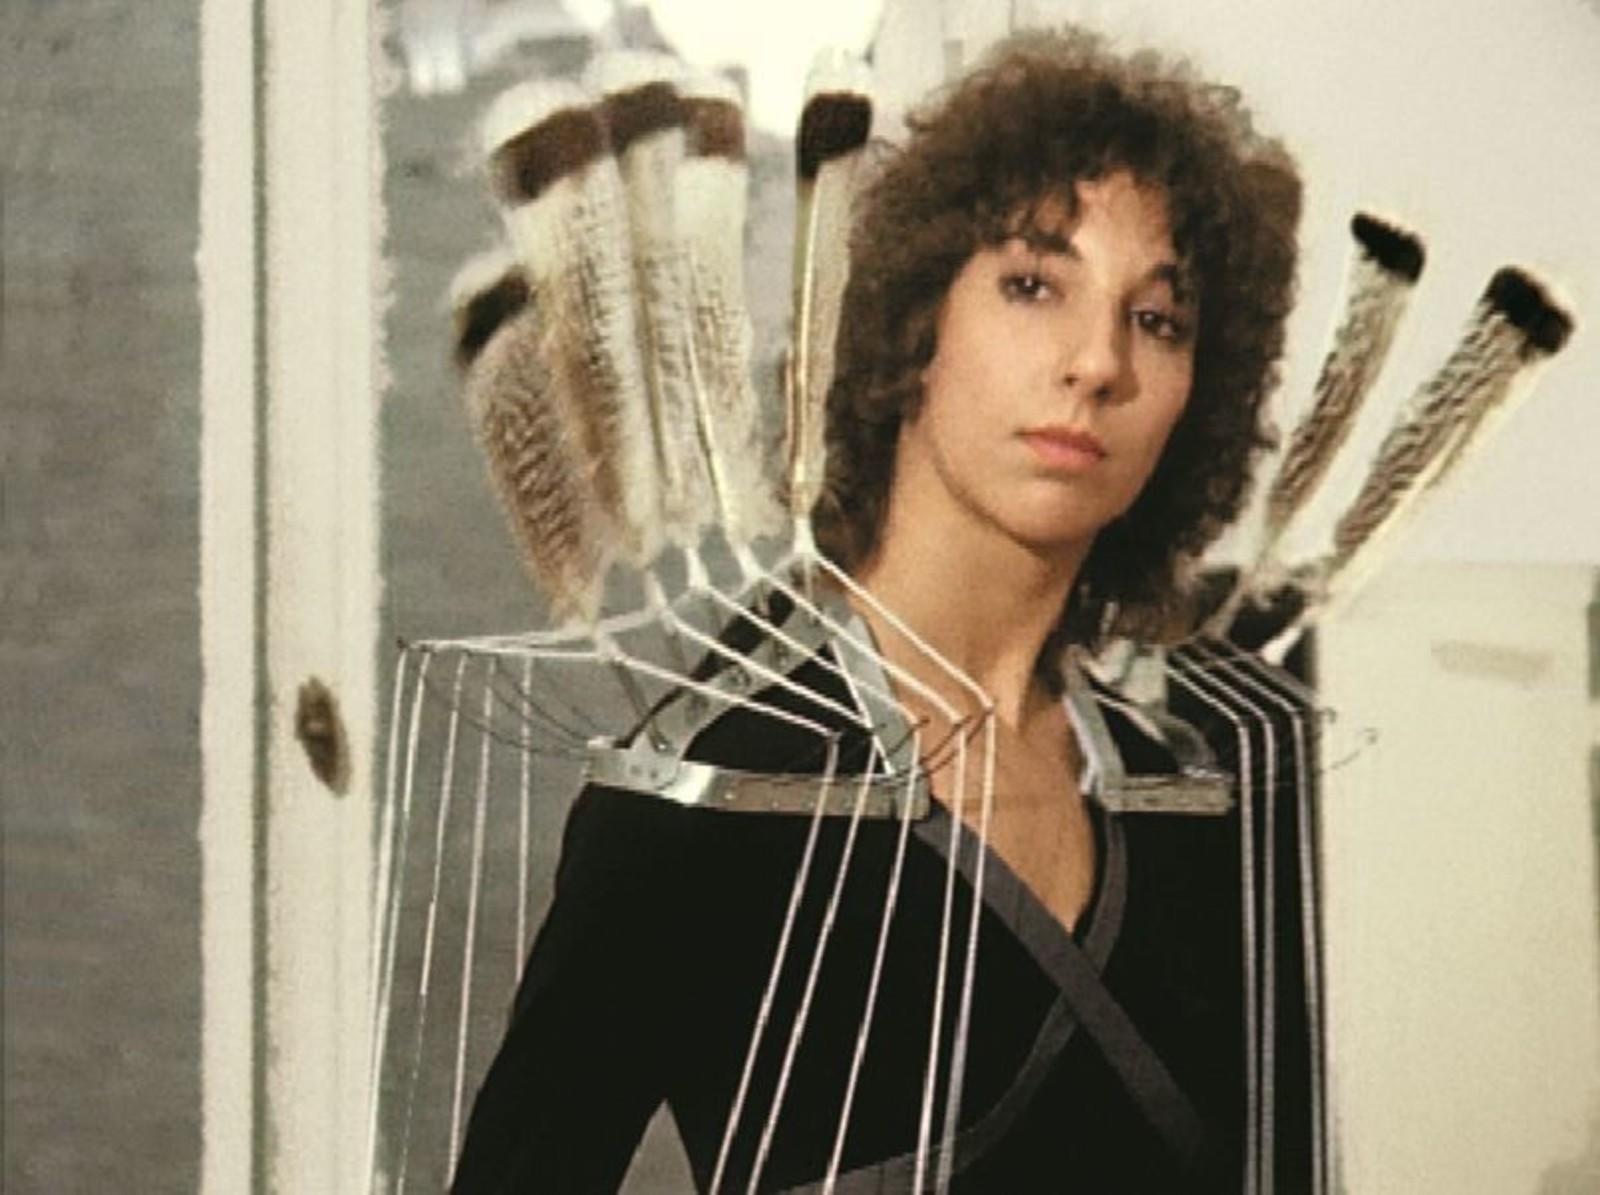 Rebecca Horn. Feathers Dancing on Shoulders. 1974&ndash;1975. Metal, threads, feathers. Private collection of Rebecca Horn.